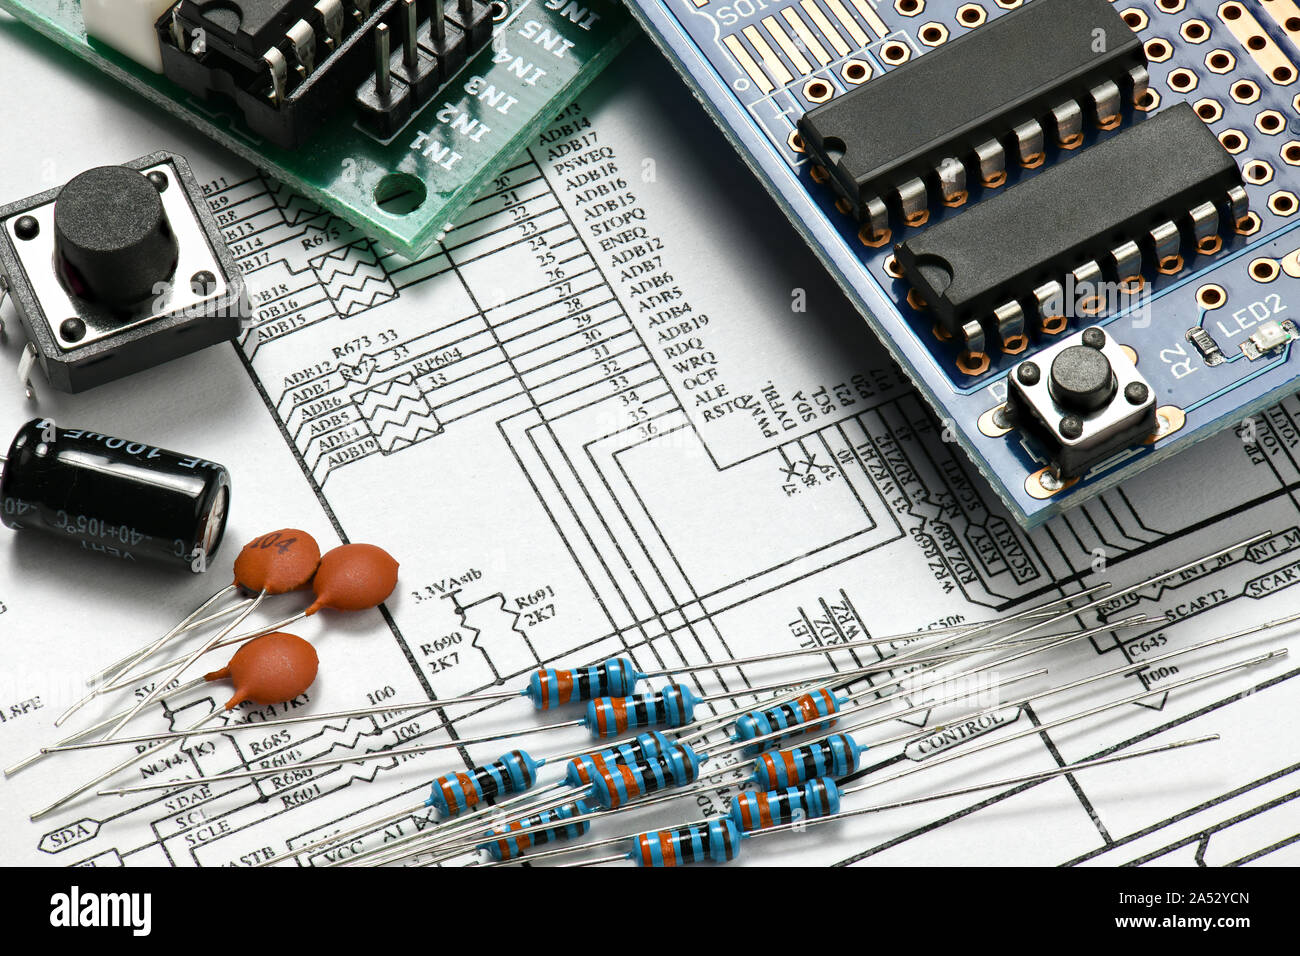 closeup of electronic components, printed circuit board, unit, part, circuit diagram, computer equipment and digital microchip - DIY kit for learning, Stock Photo